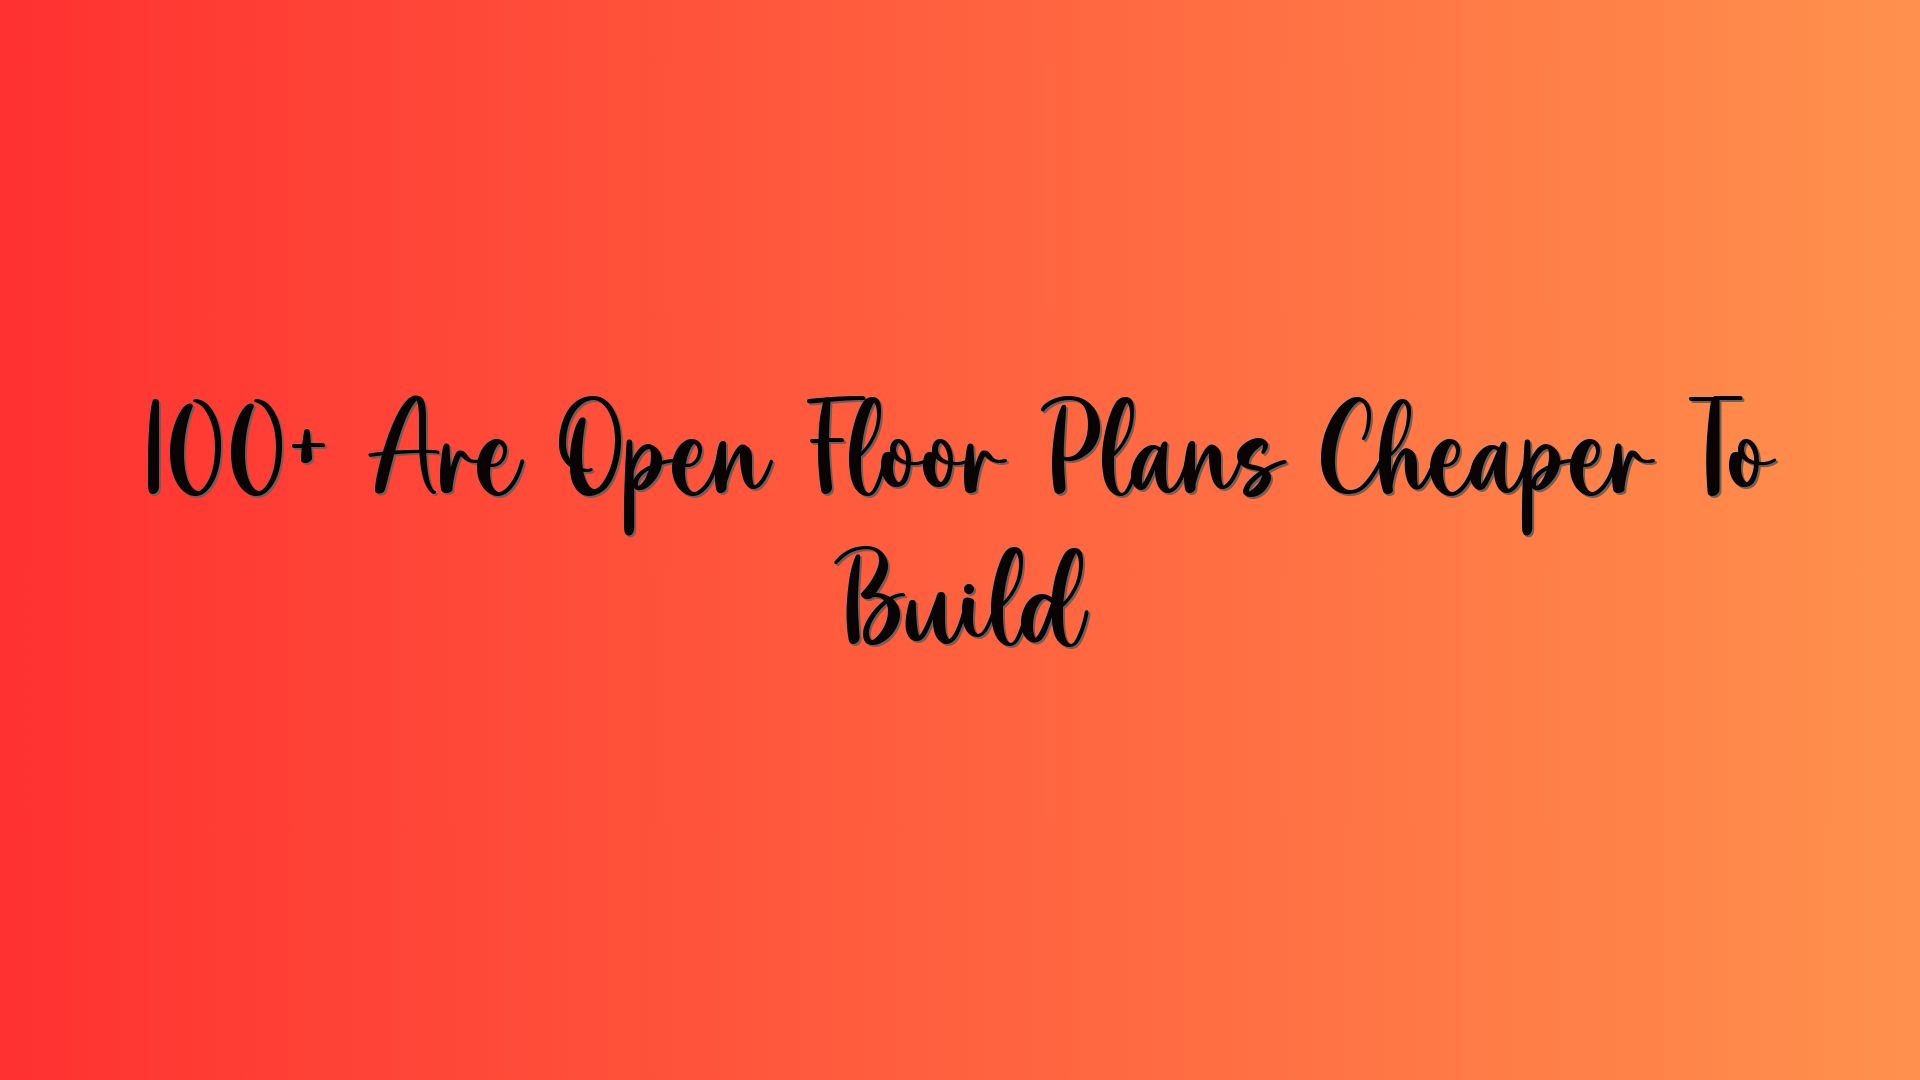 100+ Are Open Floor Plans Cheaper To Build